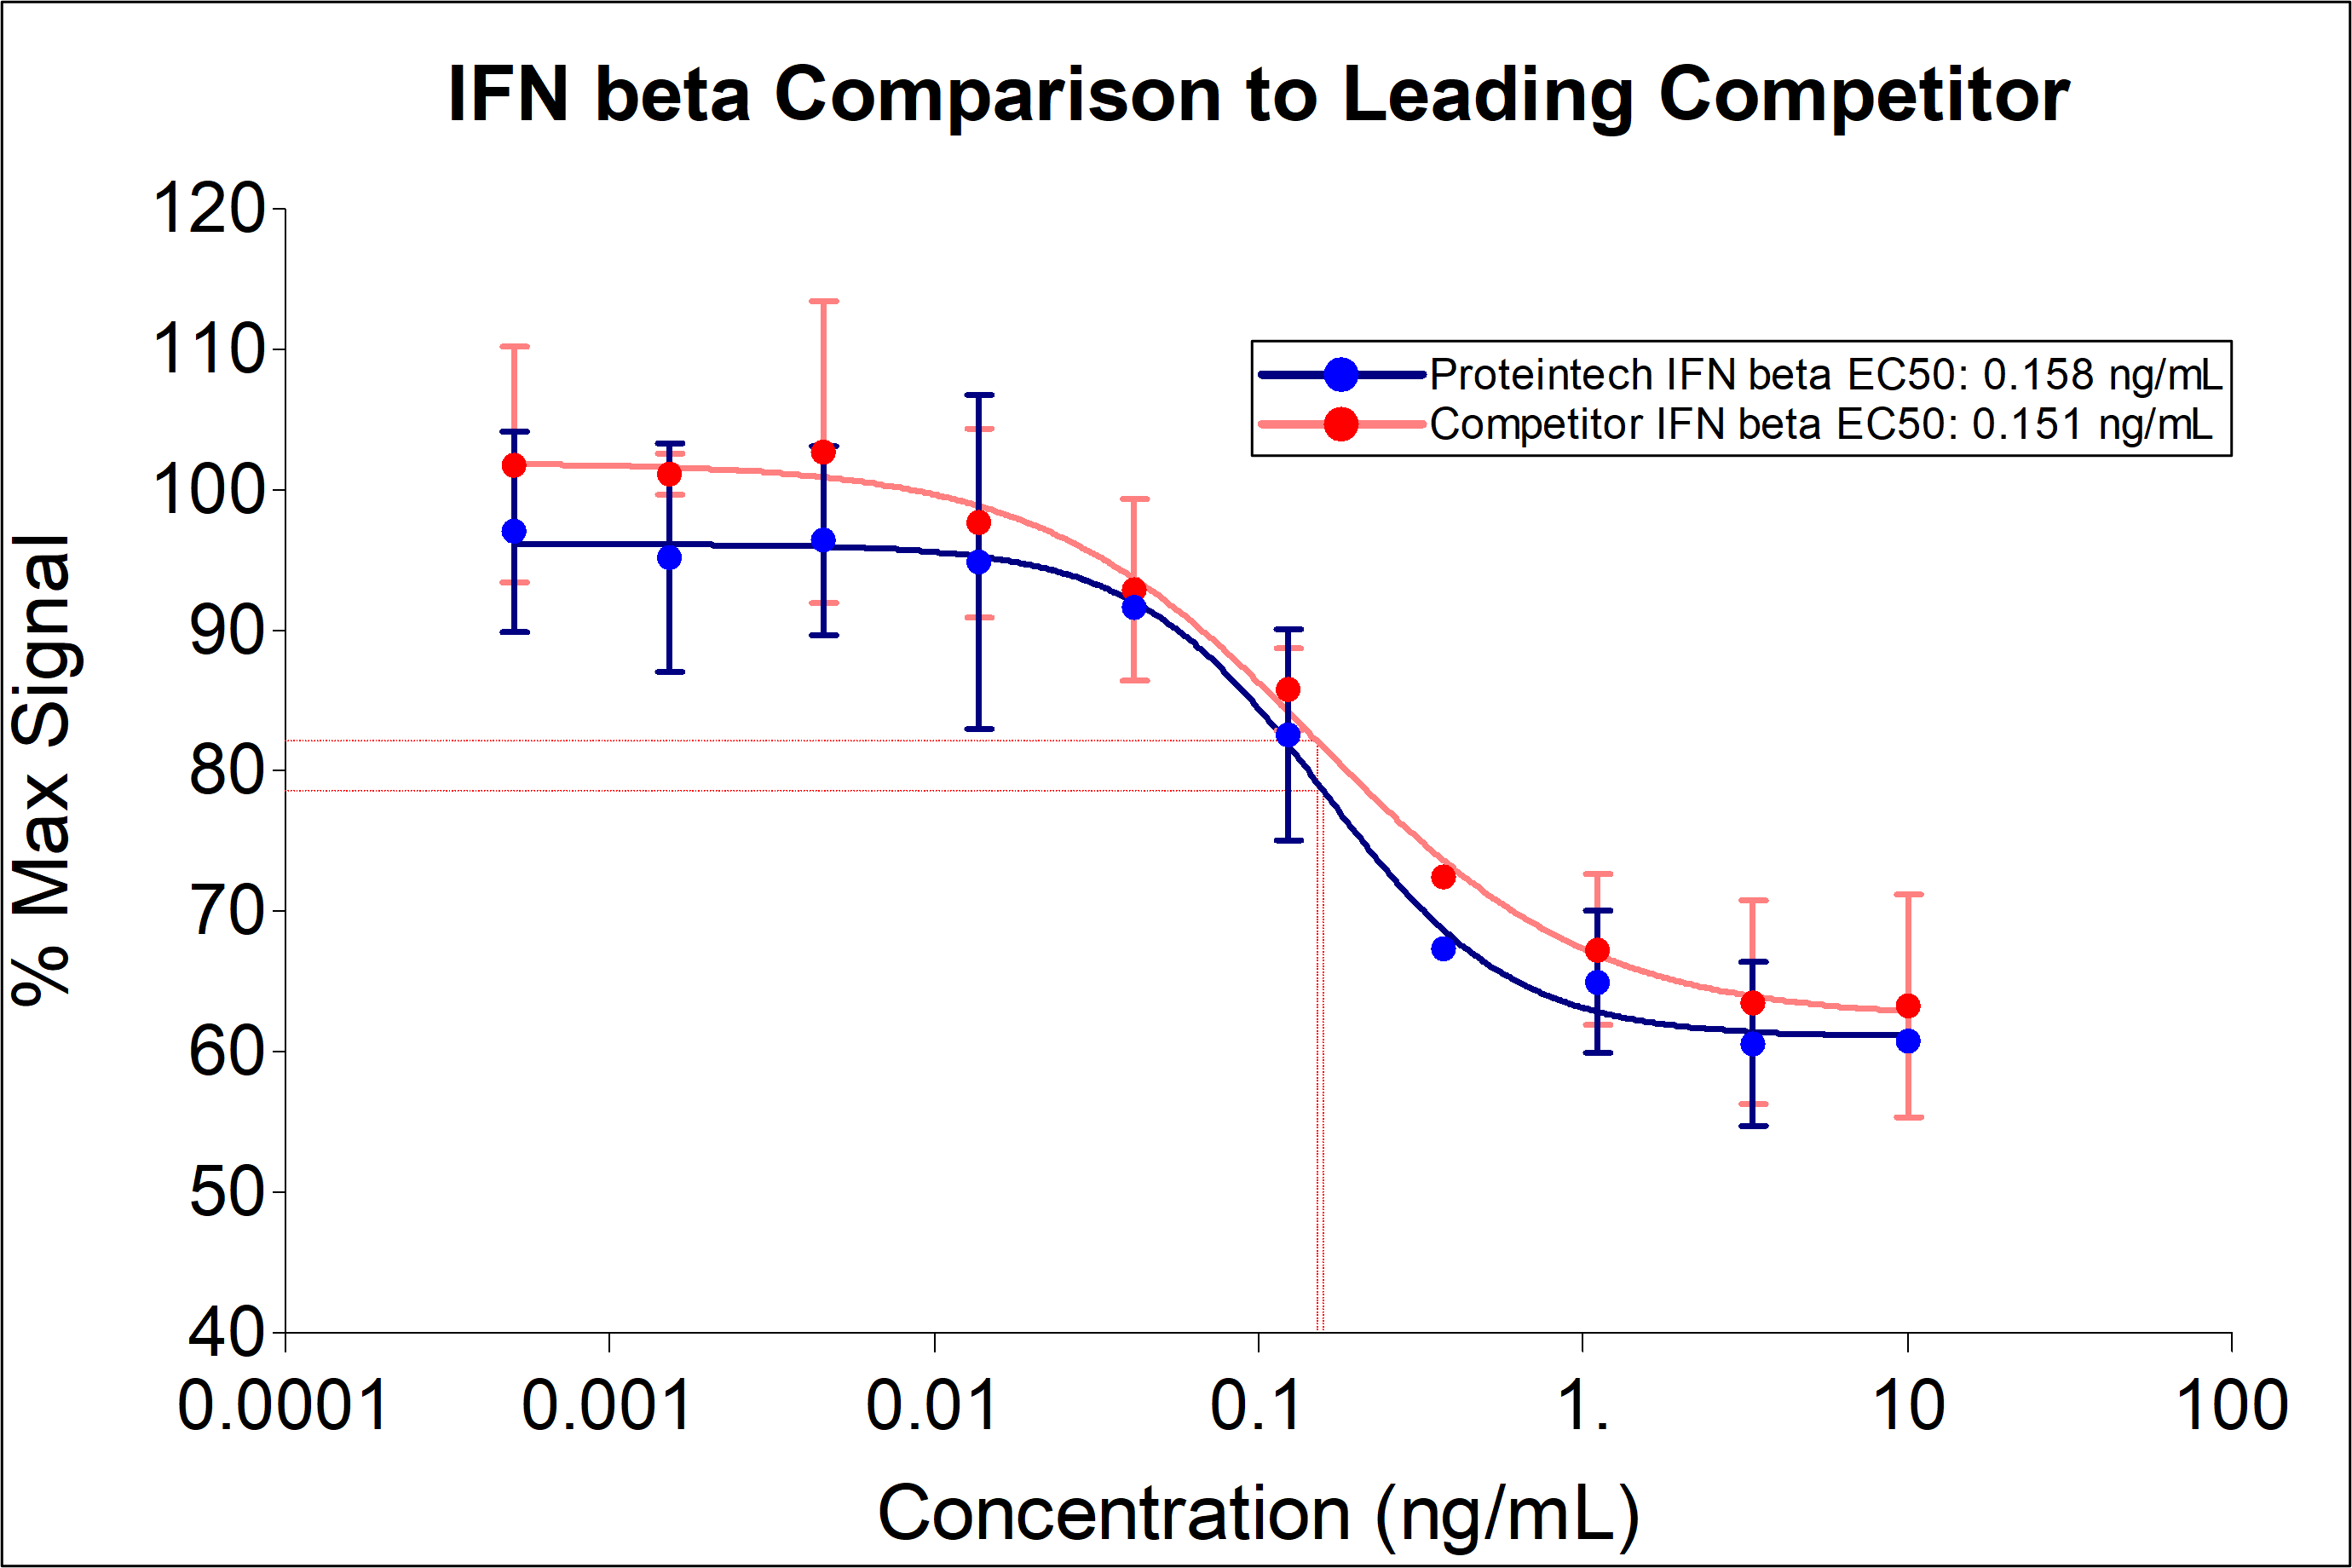 Proteintech IFN beta (HZ-1298) demonstrates equivalent induction of proliferation and EC50 to leading competitors. IFN beta dose-dependently inhibits growth of the TF-1 cell line. Cell number was quantitatively assessed by PrestoBlue® Cell Viability Reagent. TF-1 cells were treated with increasing concentrations of recombinant IFN beta for 72 hours. The EC50 was determined using a 4-parameter non-linear regression model. The EC50 range is 0.015-0.08 ng/mL​.